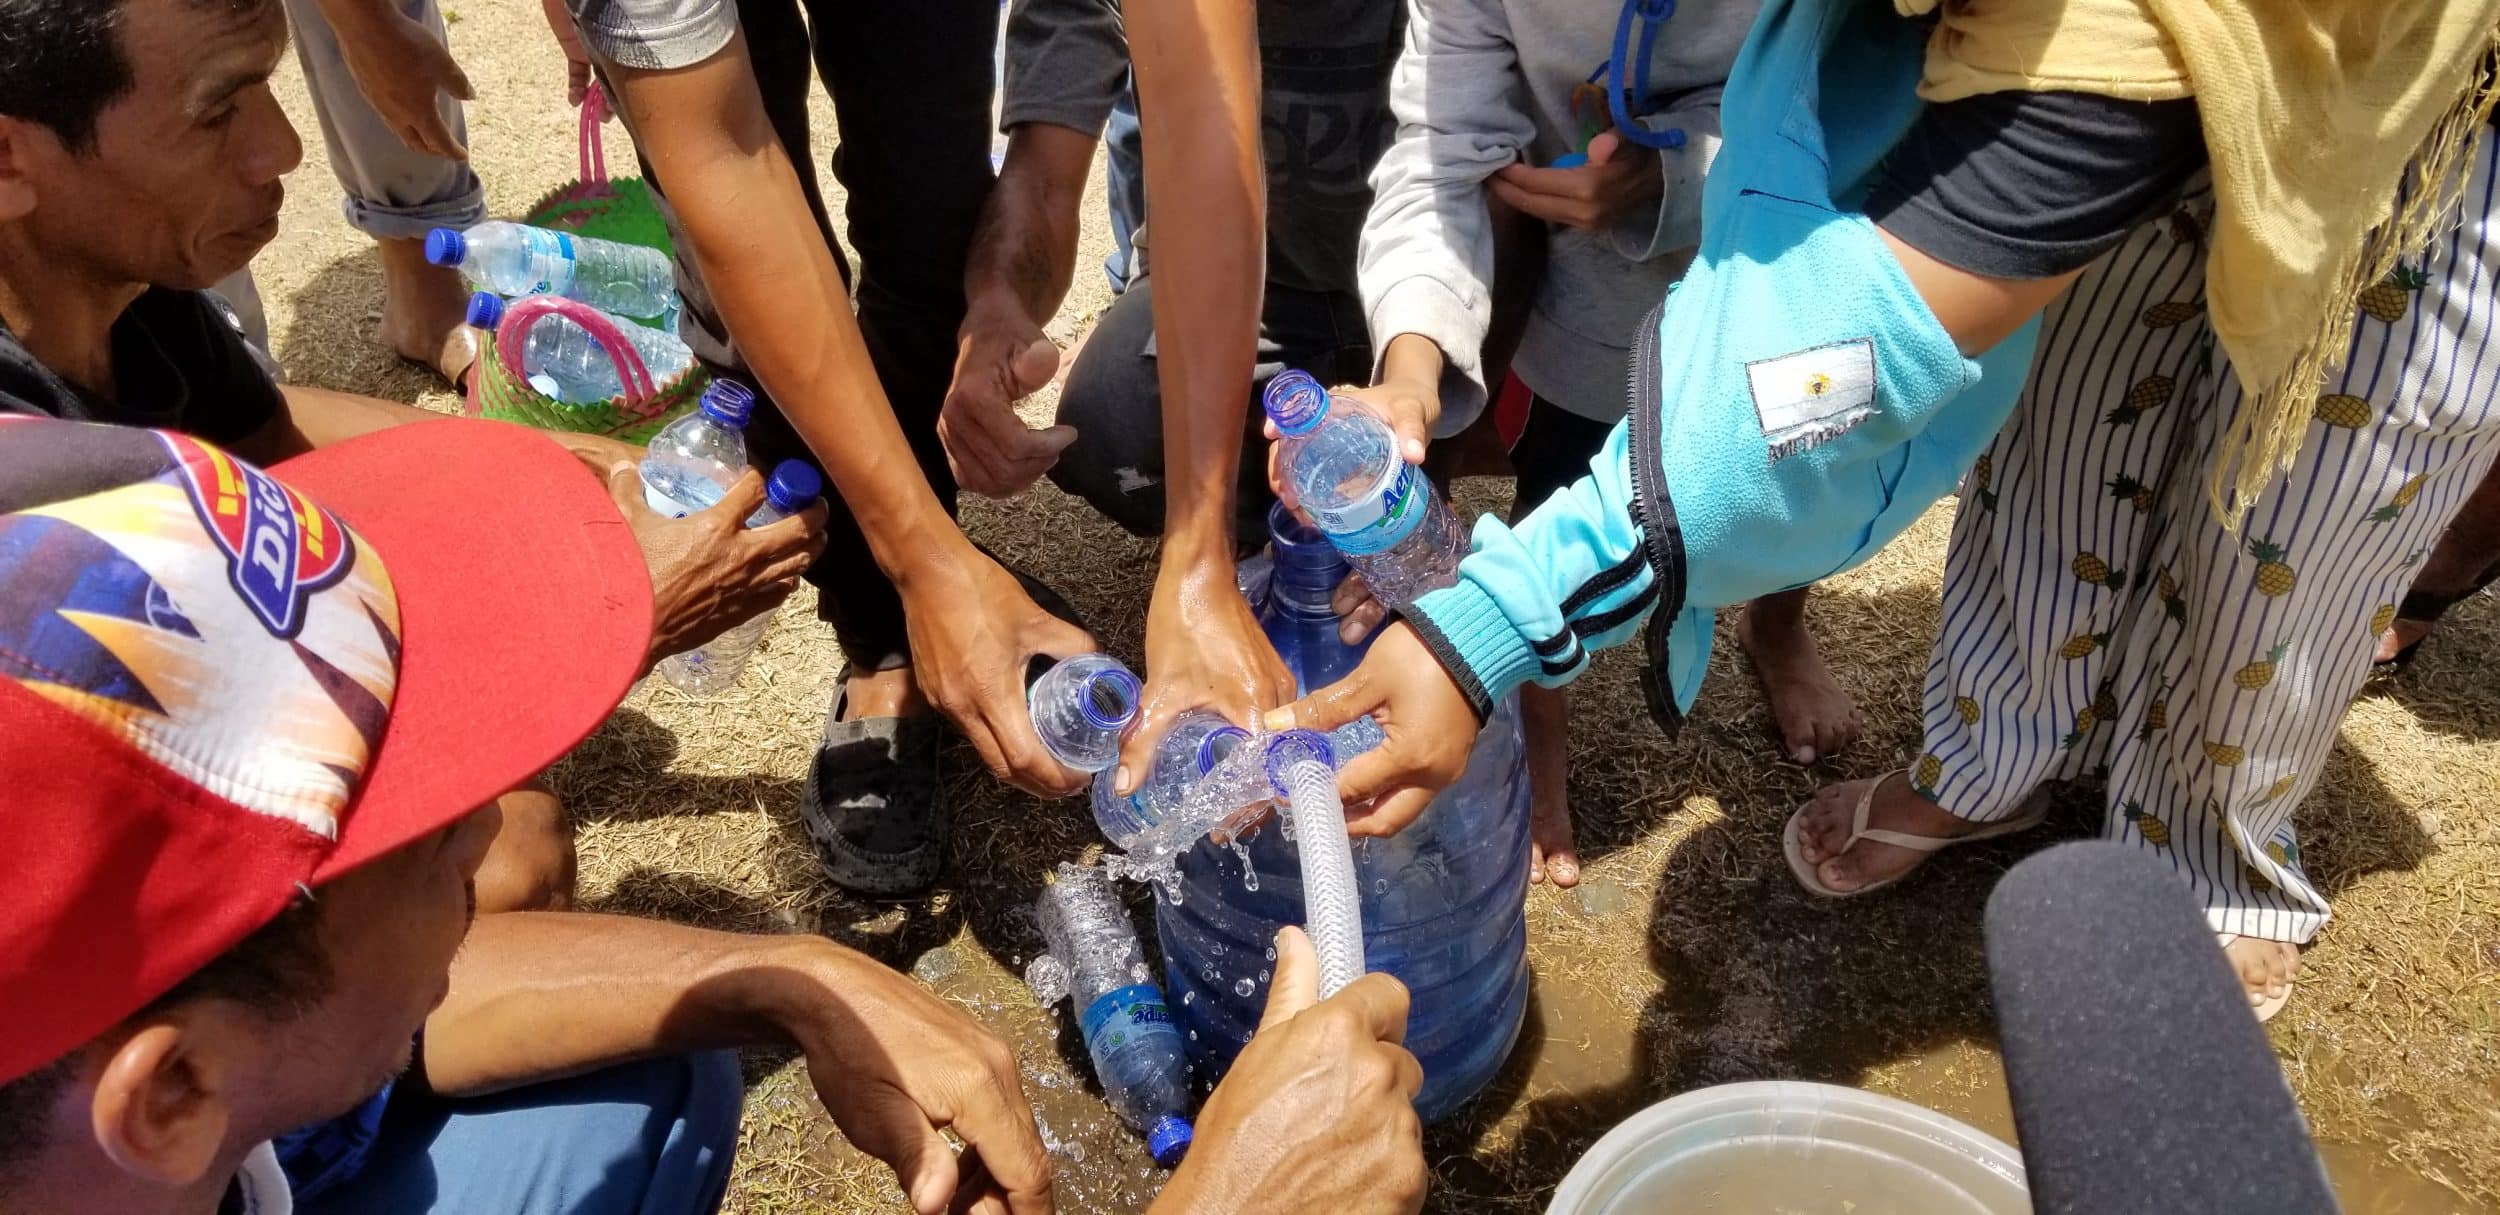 People holding out bottles to get water from a hose.